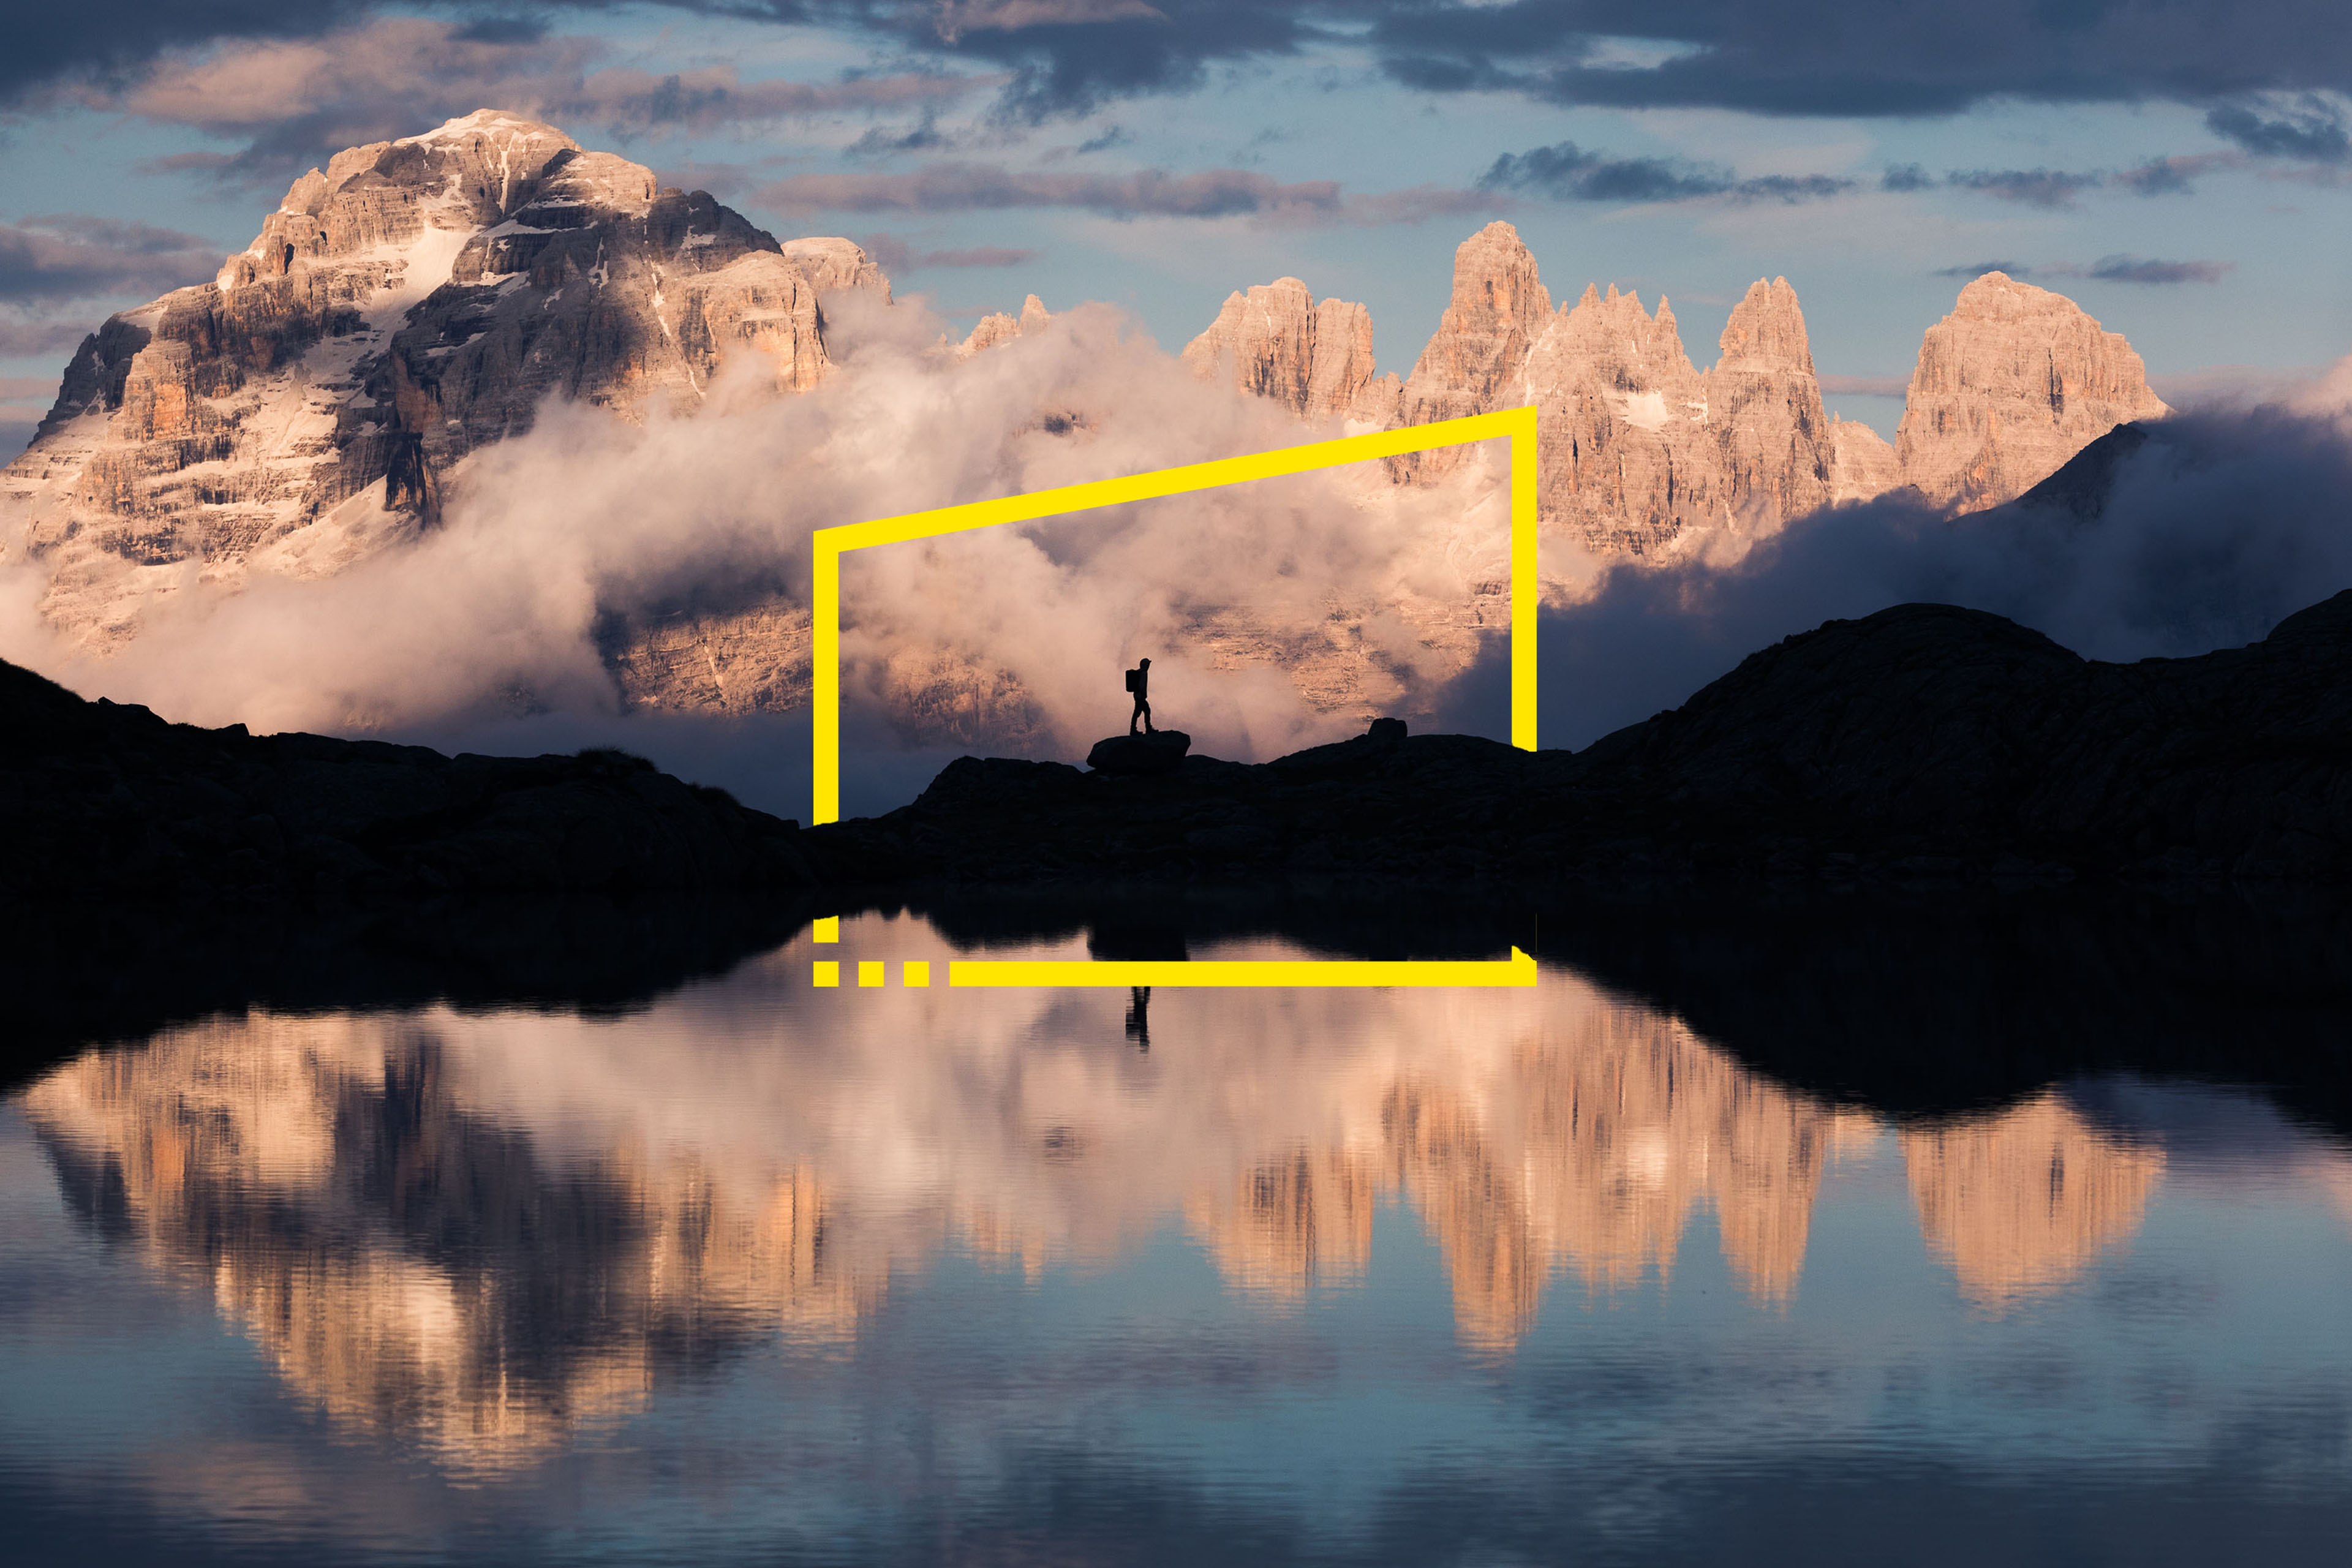 ey-hiker-at-sunset-in-adamello-brenta-nature-park-italy-back-ground